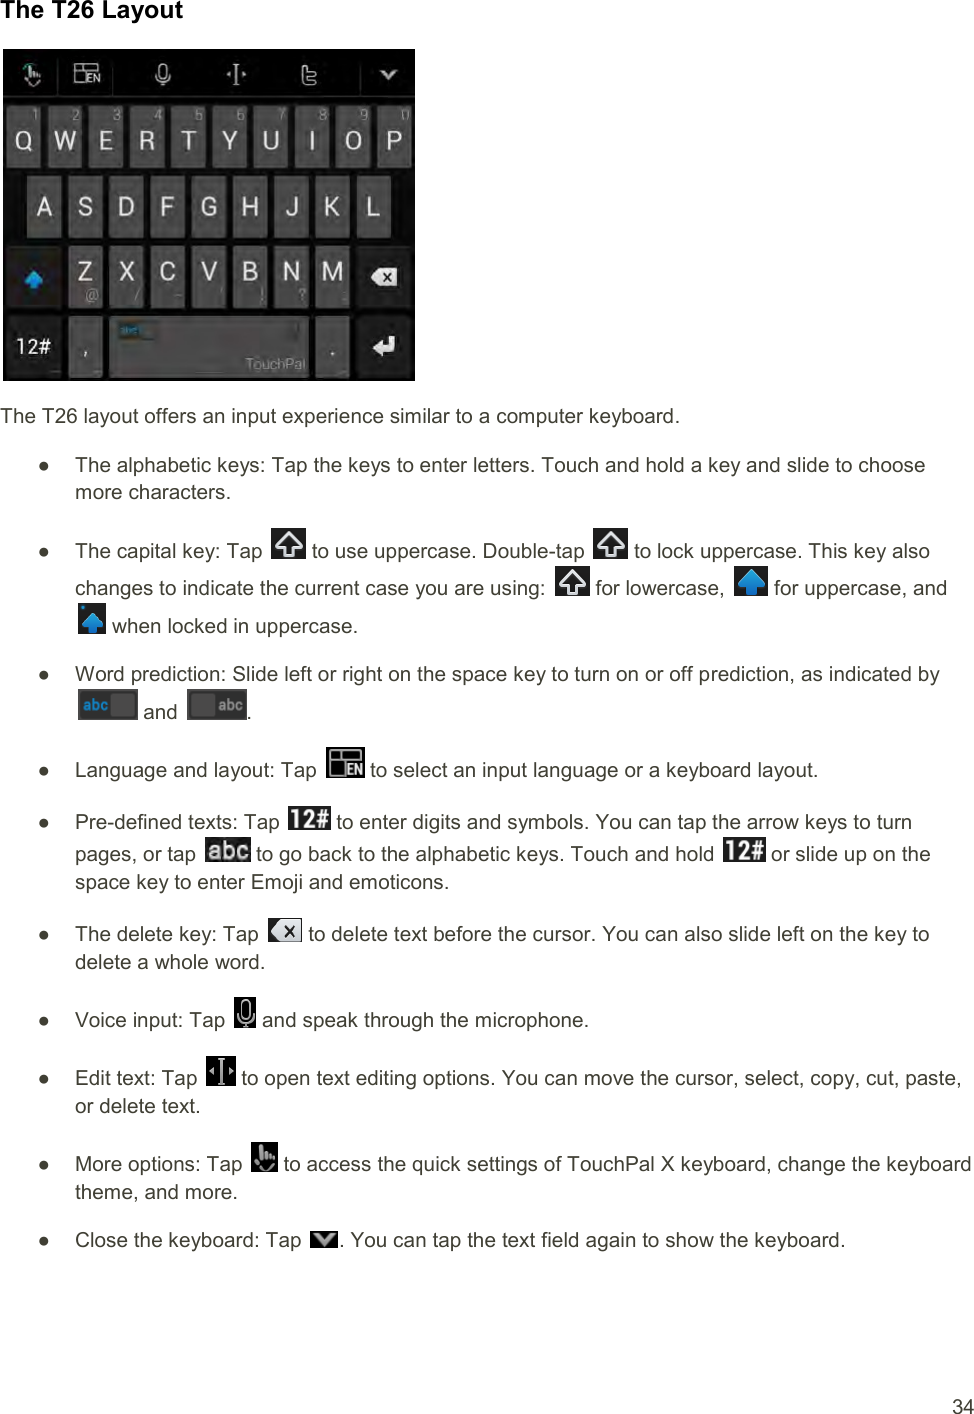  34 The T26 Layout  The T26 layout offers an input experience similar to a computer keyboard. ●  The alphabetic keys: Tap the keys to enter letters. Touch and hold a key and slide to choose more characters. ●  The capital key: Tap   to use uppercase. Double-tap   to lock uppercase. This key also changes to indicate the current case you are using:   for lowercase,   for uppercase, and  when locked in uppercase. ●  Word prediction: Slide left or right on the space key to turn on or off prediction, as indicated by  and  . ●  Language and layout: Tap   to select an input language or a keyboard layout. ●  Pre-defined texts: Tap   to enter digits and symbols. You can tap the arrow keys to turn pages, or tap   to go back to the alphabetic keys. Touch and hold   or slide up on the space key to enter Emoji and emoticons. ●  The delete key: Tap   to delete text before the cursor. You can also slide left on the key to delete a whole word. ●  Voice input: Tap   and speak through the microphone. ●  Edit text: Tap   to open text editing options. You can move the cursor, select, copy, cut, paste, or delete text. ●  More options: Tap   to access the quick settings of TouchPal X keyboard, change the keyboard theme, and more. ●  Close the keyboard: Tap  . You can tap the text field again to show the keyboard. 